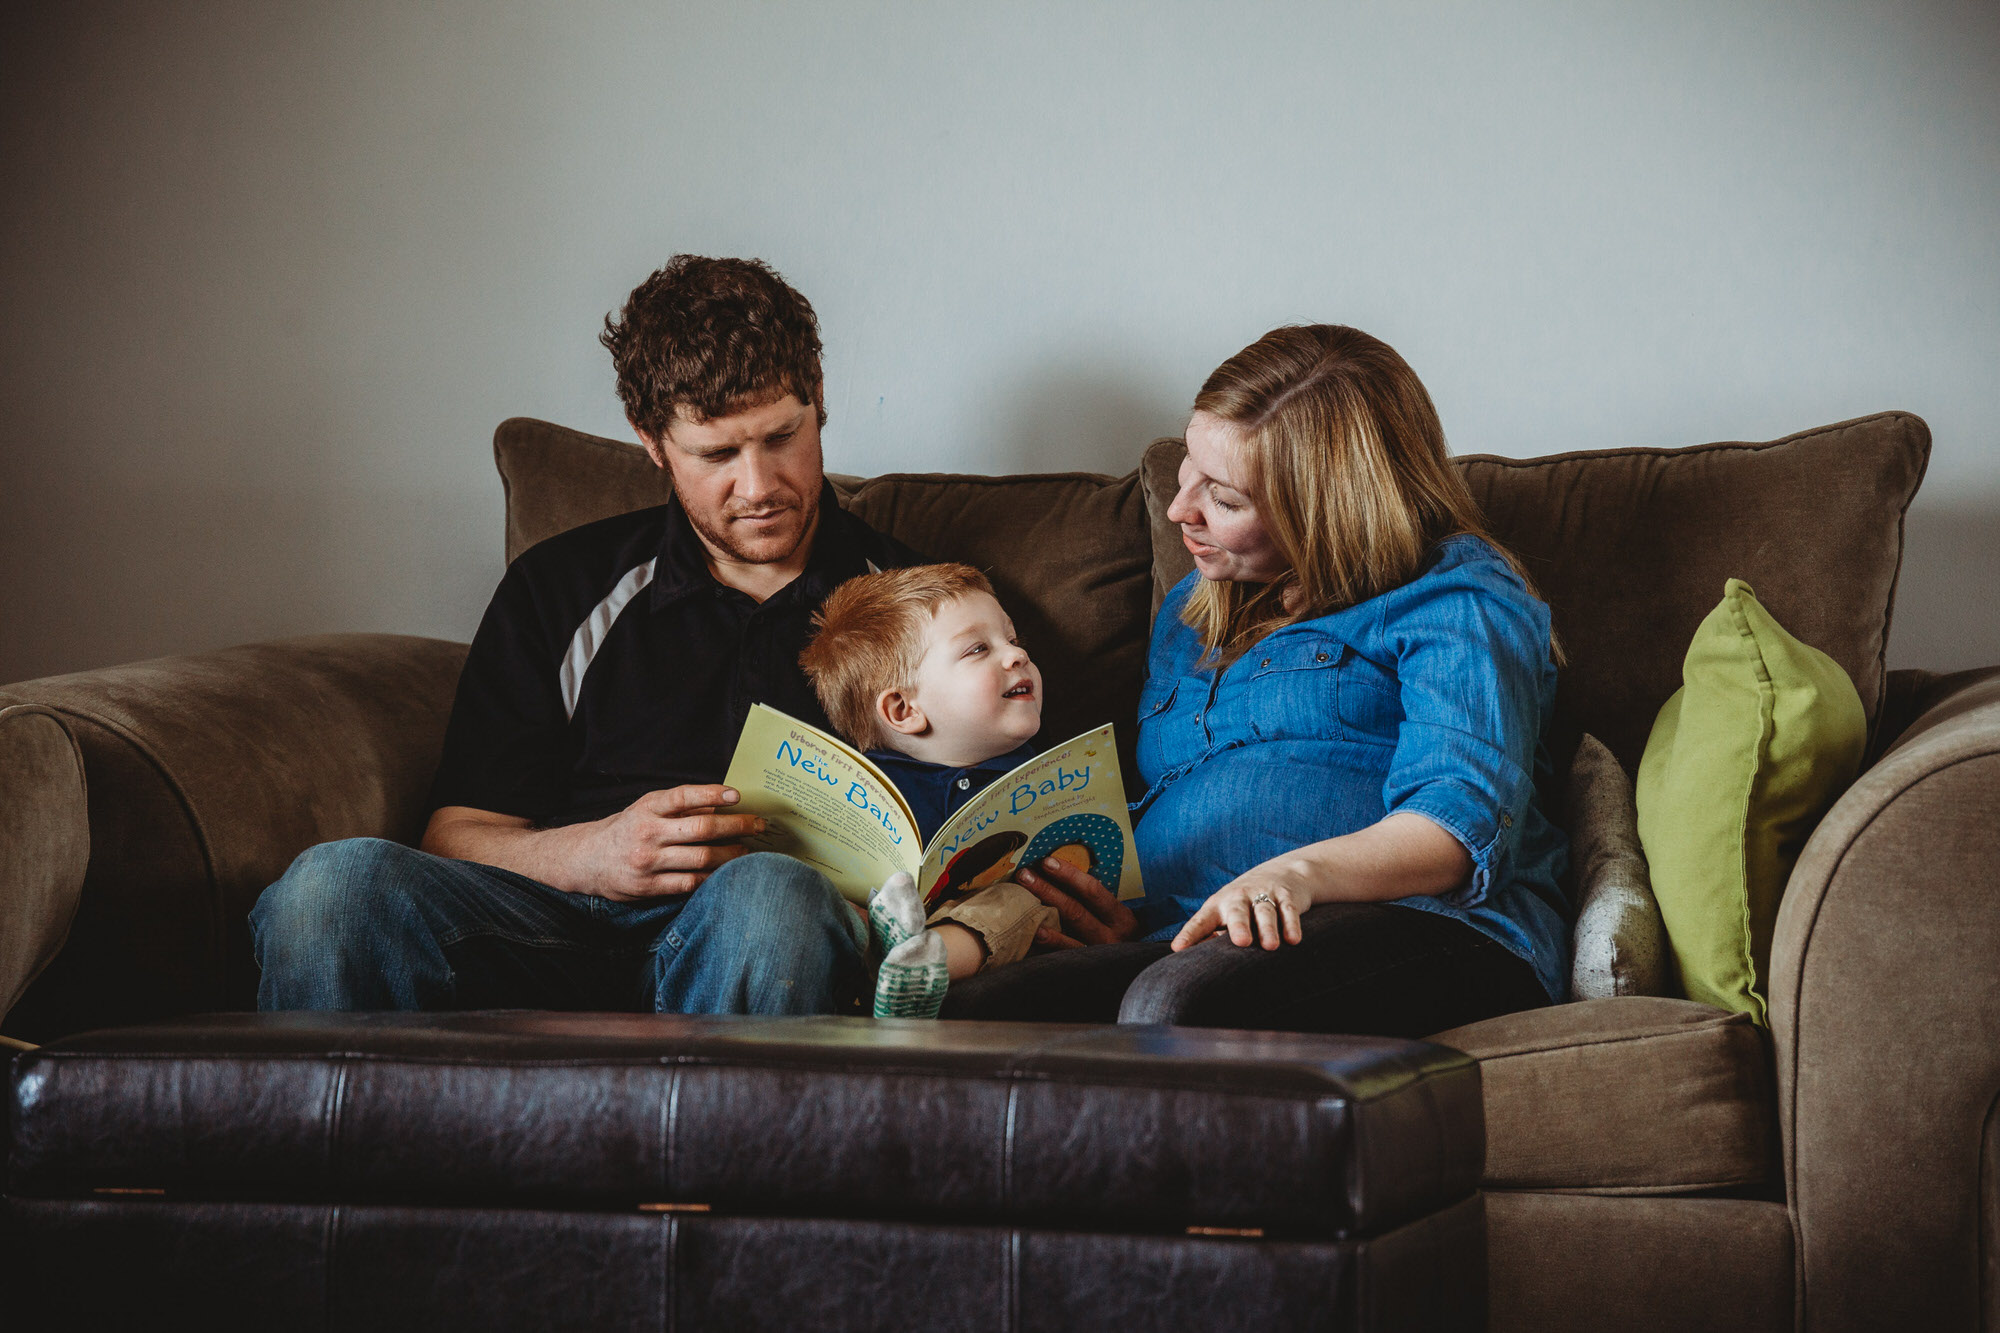 Dundas Maternity Photographer - family reading a new baby book together on the couch